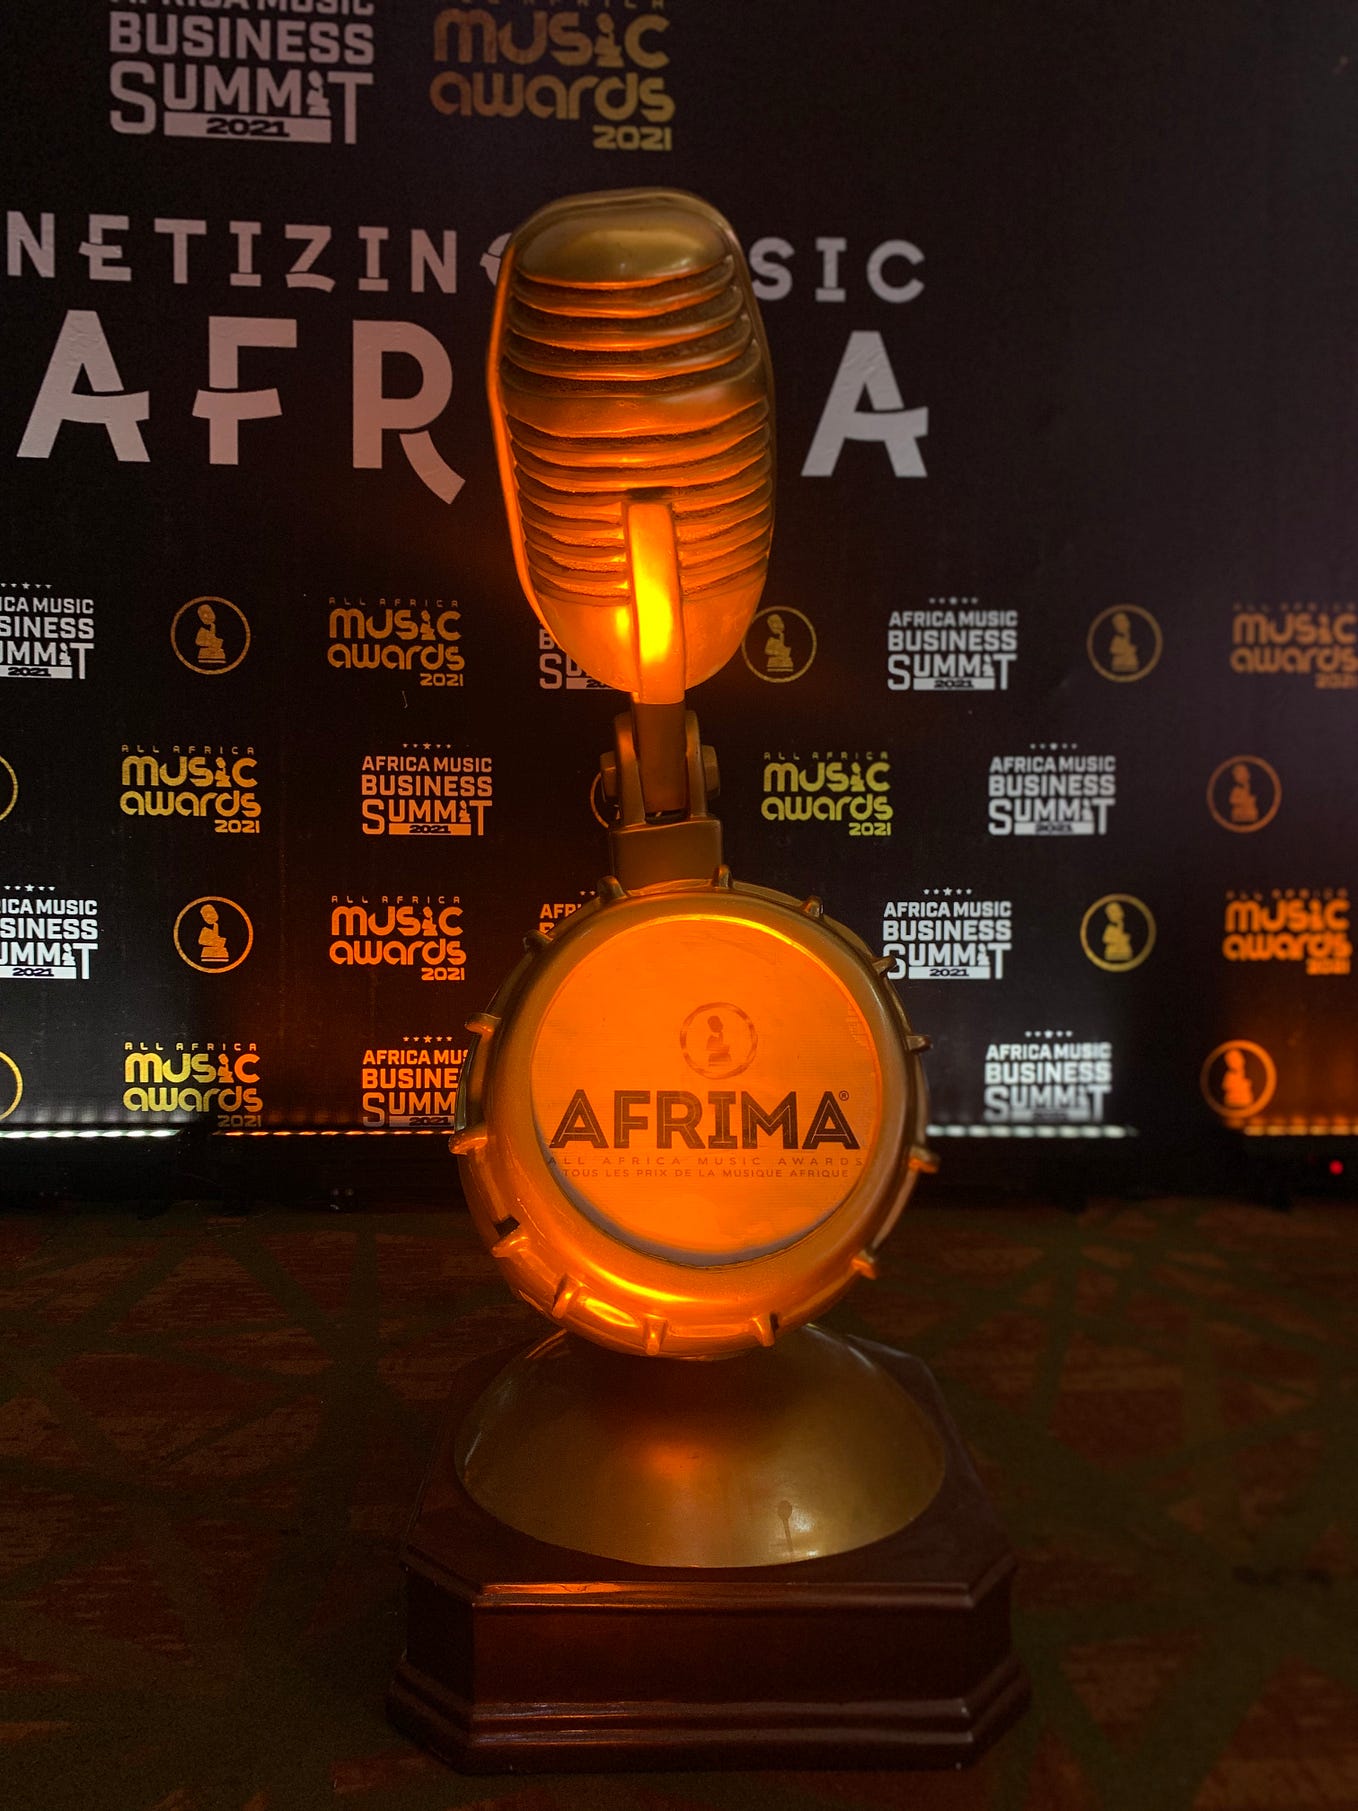 AFRIMA Music Business Summit: A Worthy Experience